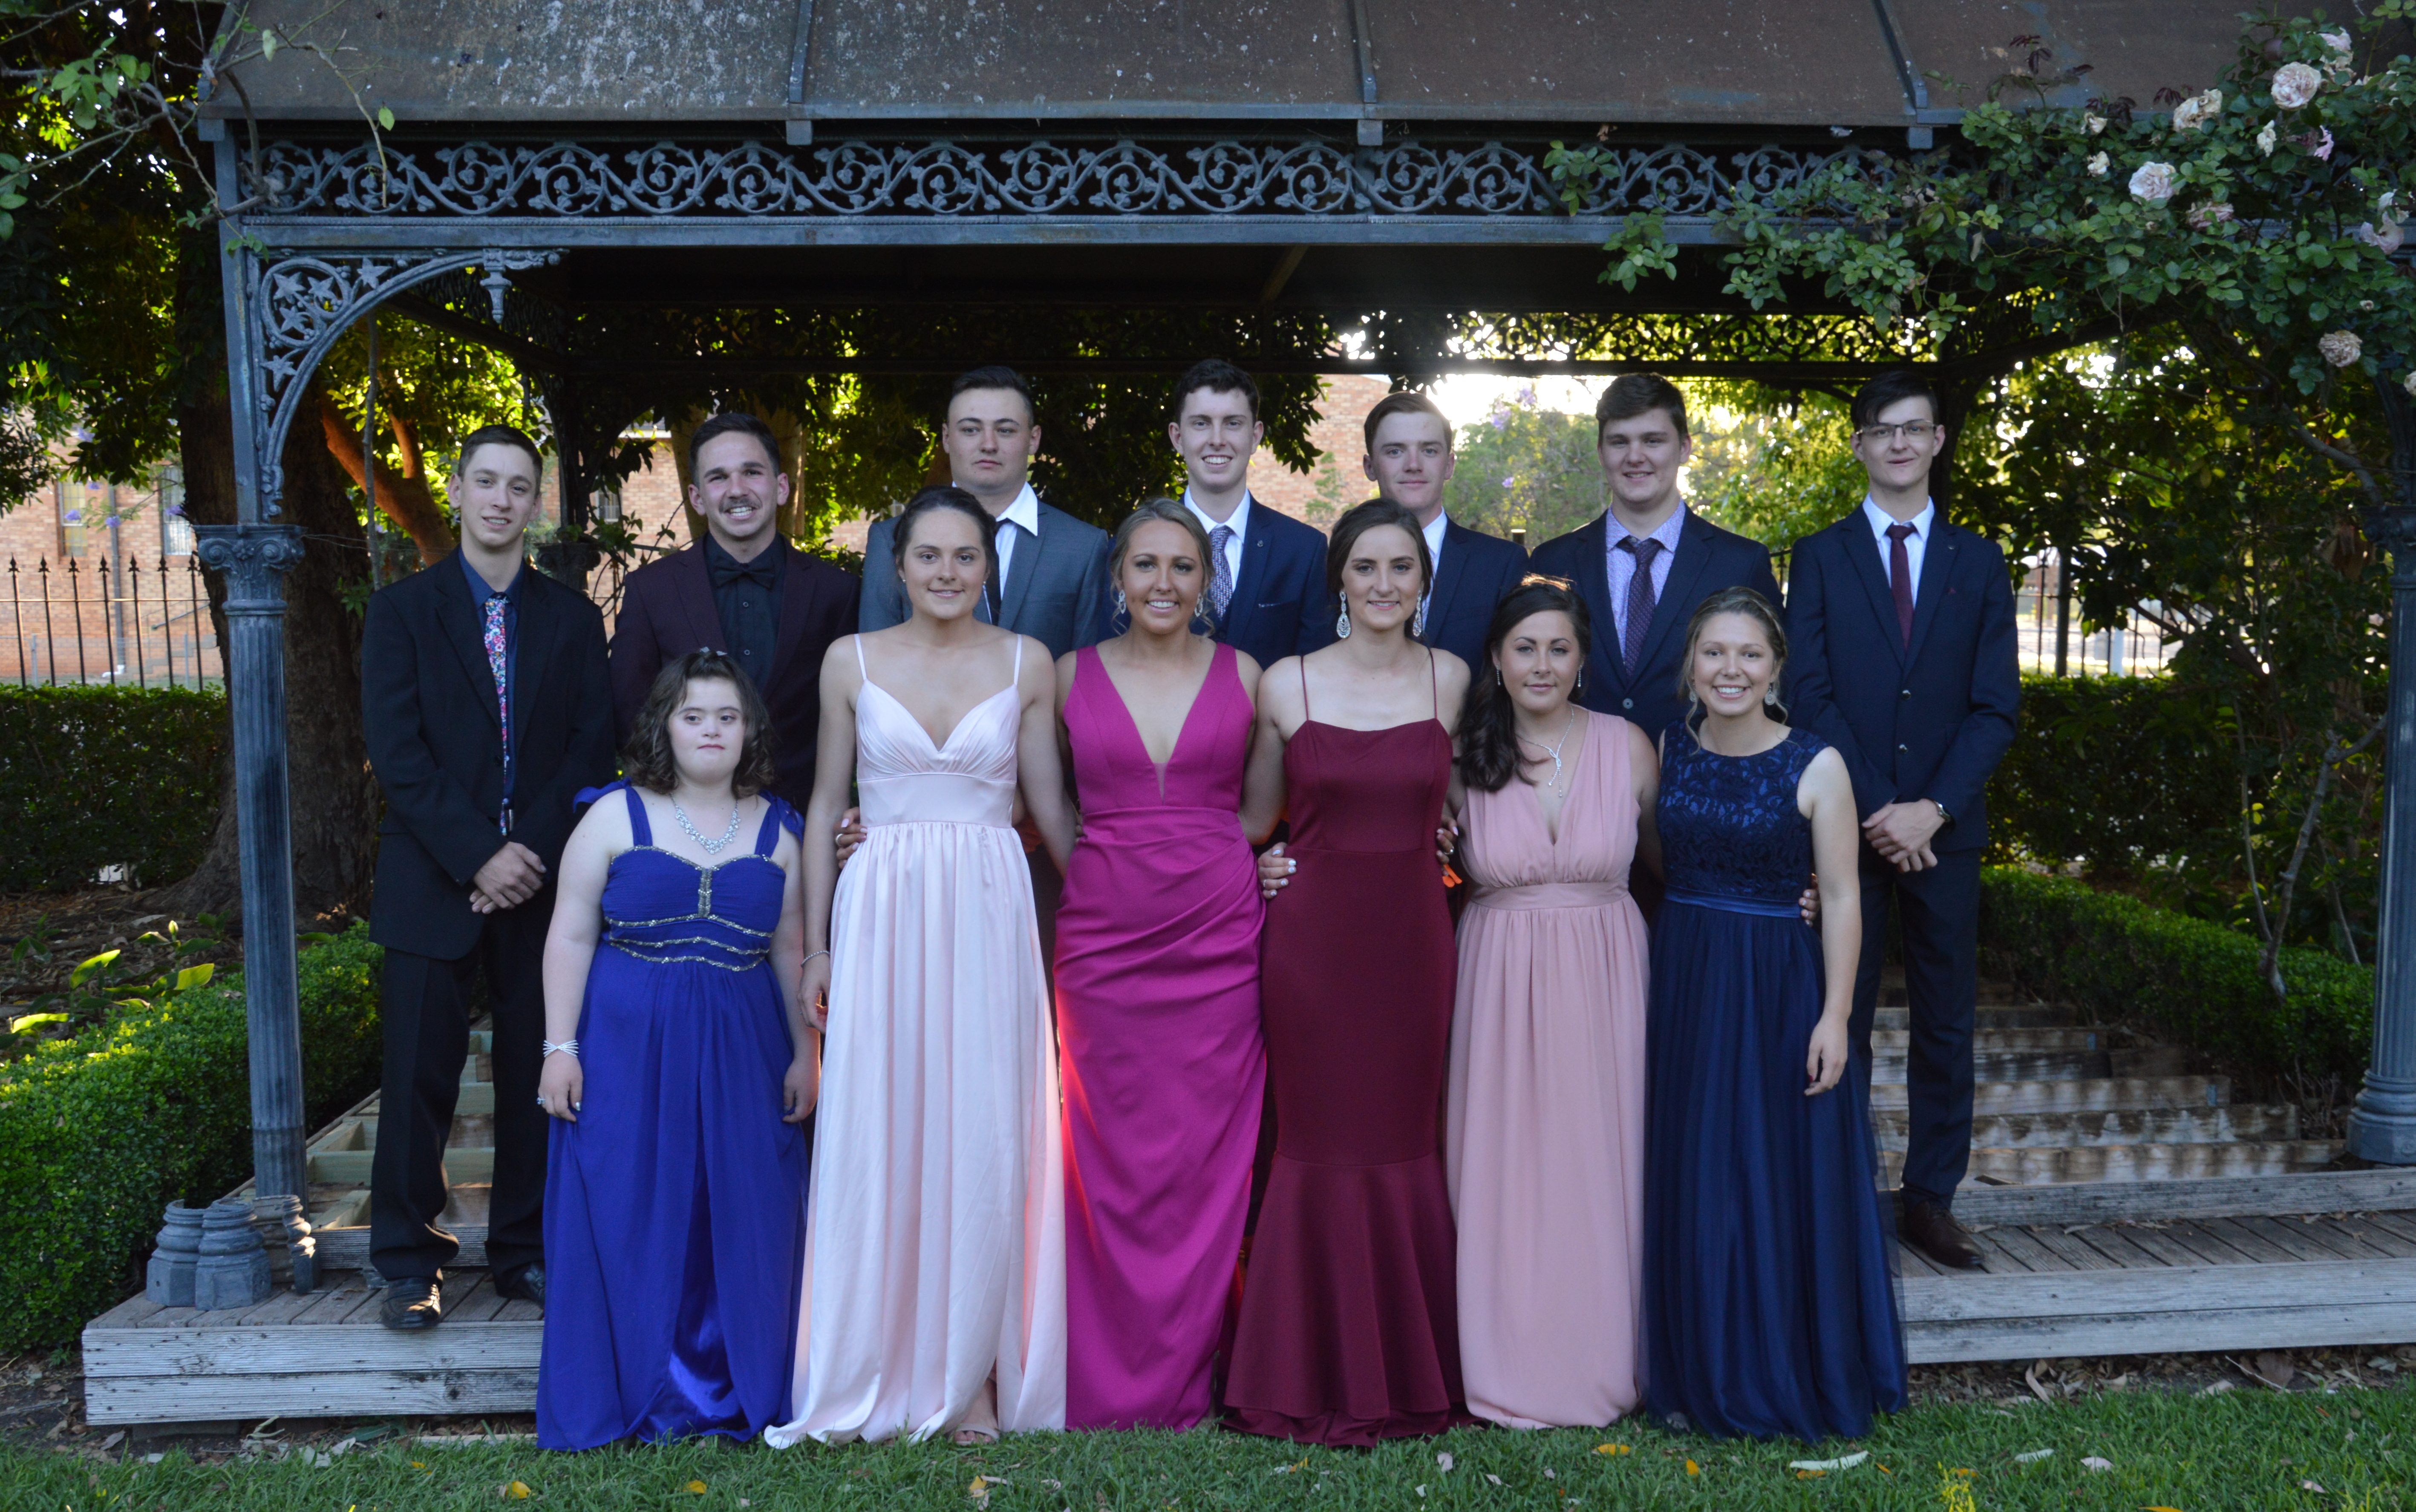 Oh, what a night! WWHS class of 2019 year 12 formal photos